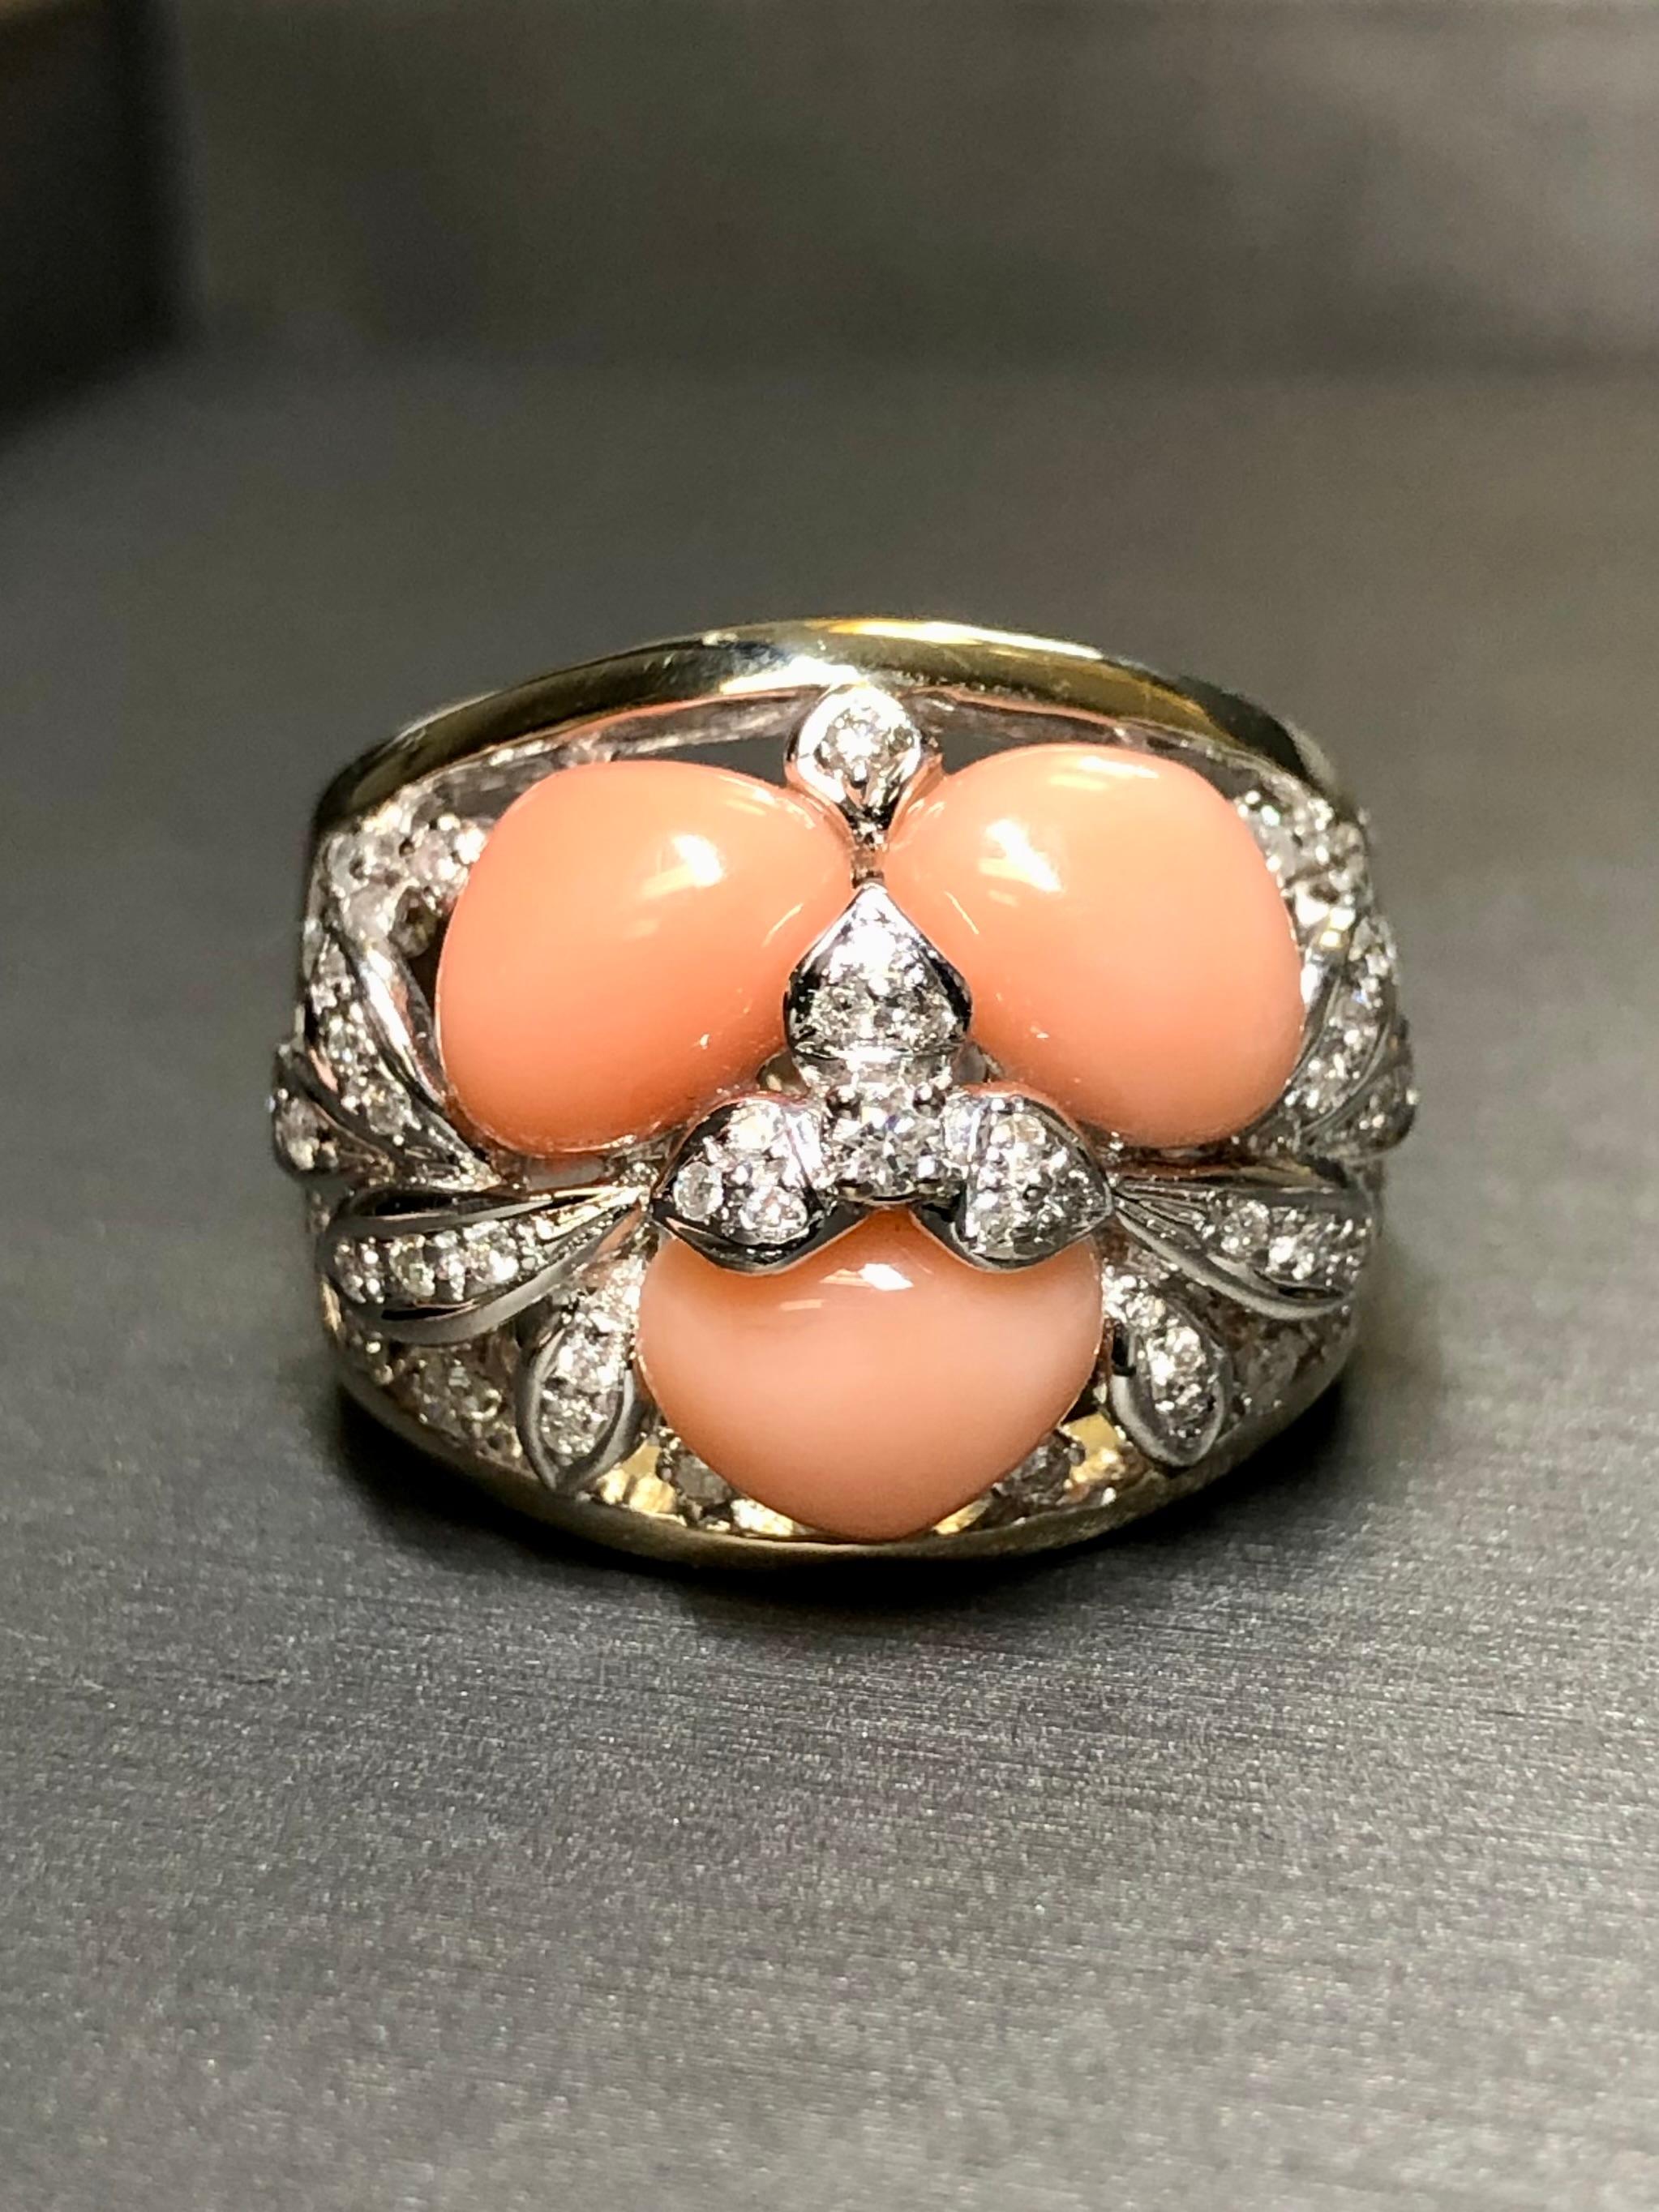 
A bold statement ring done in 18K white gold and set with the three polished coral cabochons surrounded by approximately .60cttw in H-J color Si2-i2 clarity rounds diamonds.


Dimensions/ Weight:

Ring measures .75” wide and the top and weighs